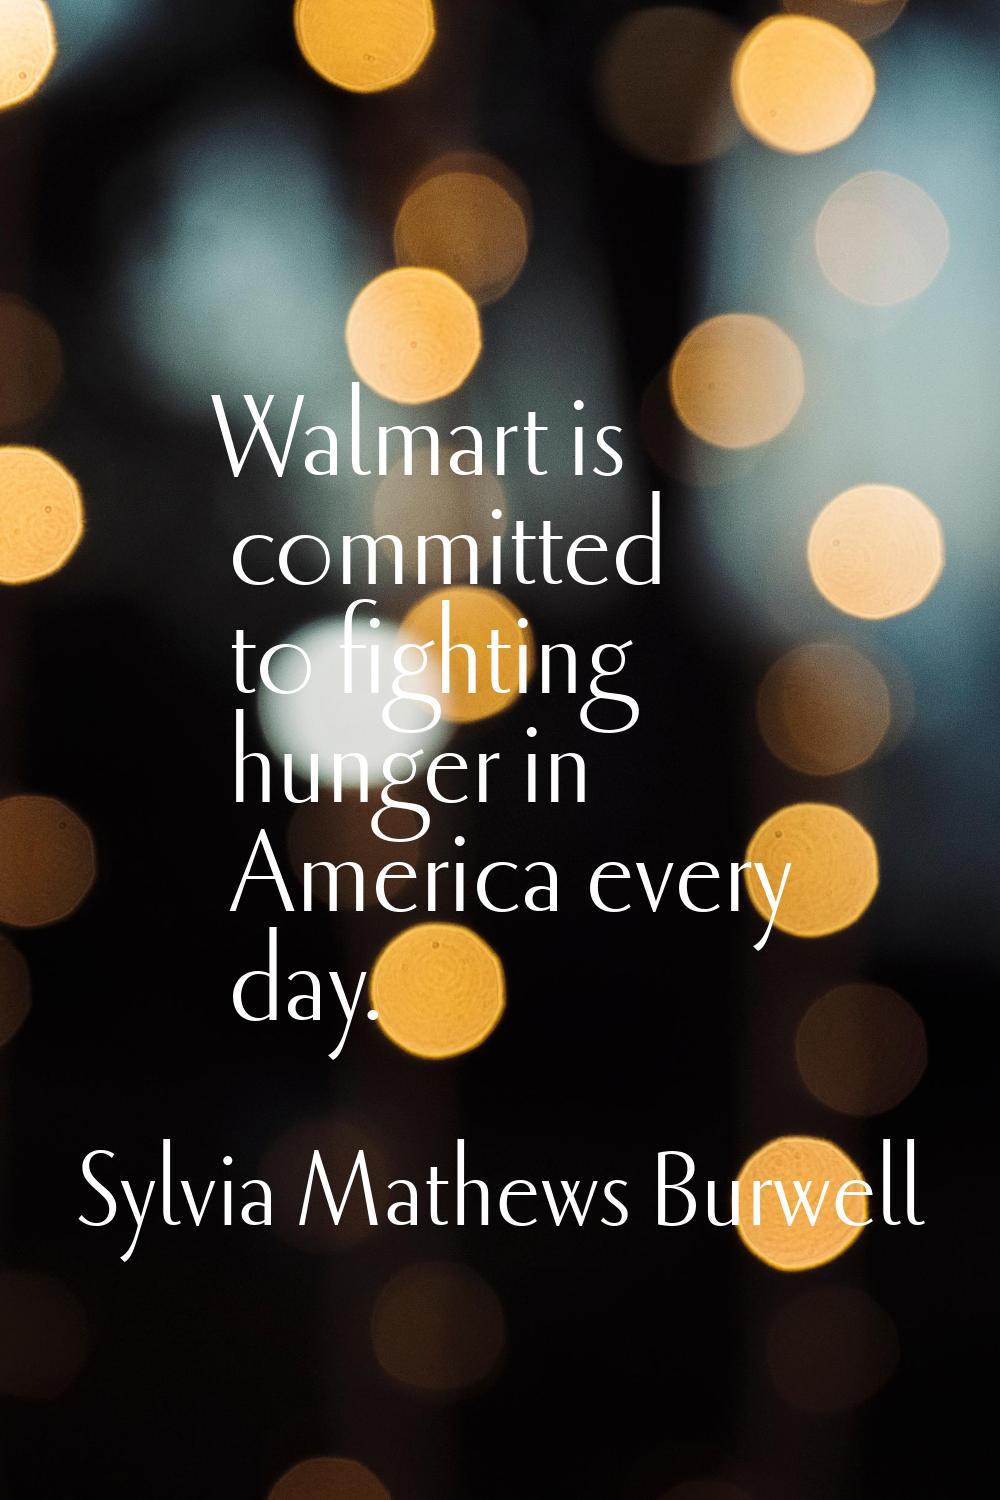 Walmart is committed to fighting hunger in America every day.